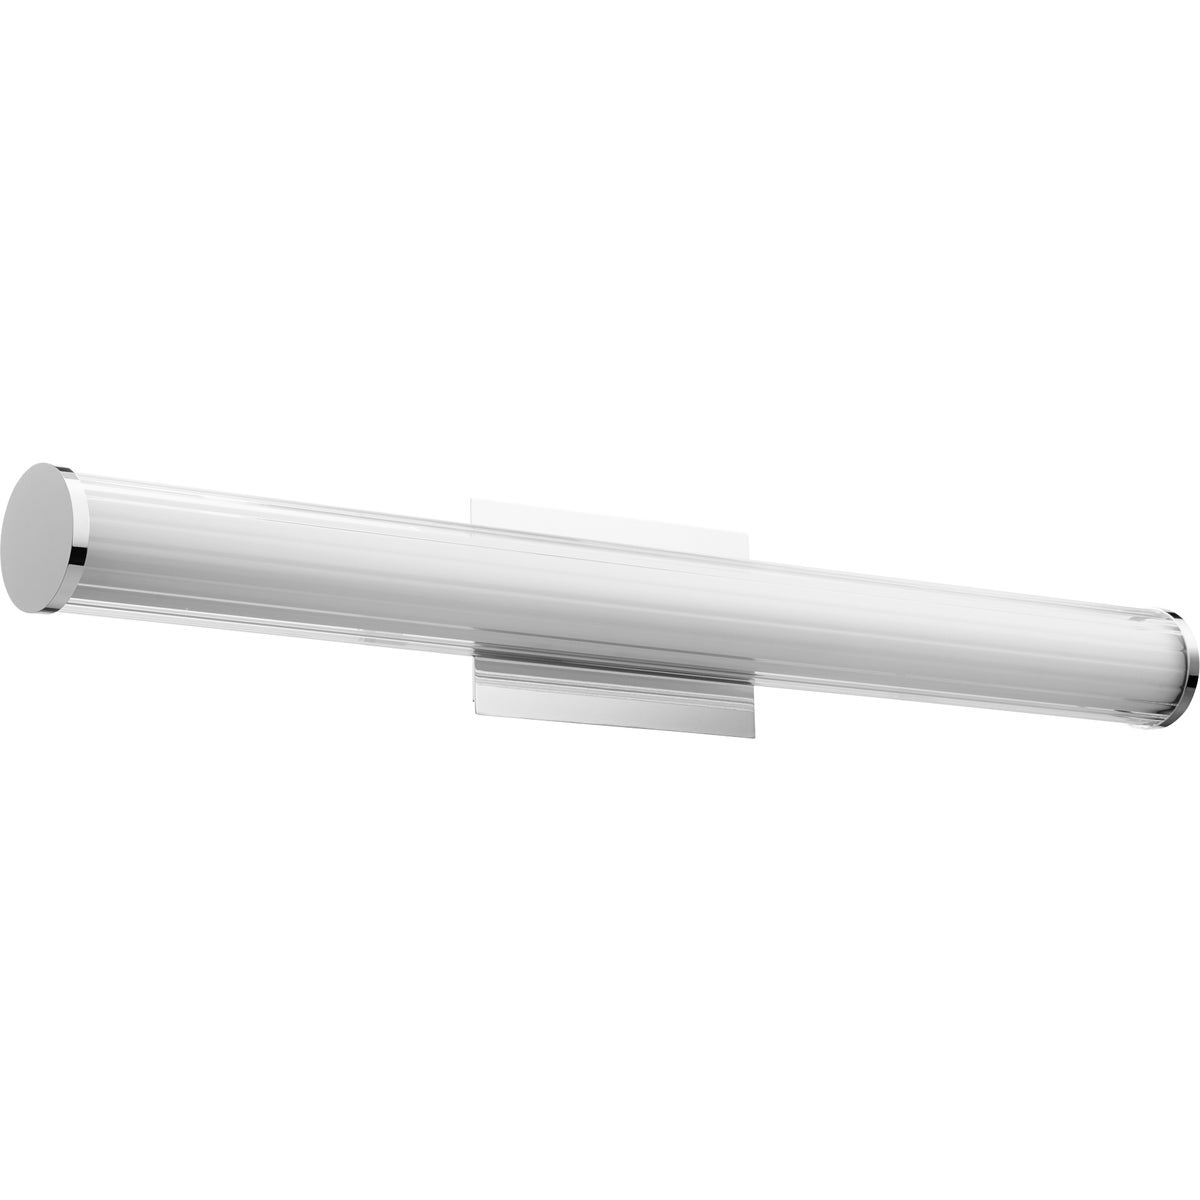 LED Vanity Light by Quorum International - A sleek and modern light fixture with clean lines. Perfect for any residential space. 26W LED, 2205 lumens, 3000K color temperature. Dimmable and UL Listed. 34.5&quot;W x 5.25&quot;H x 3.75&quot;E. 2-year warranty.